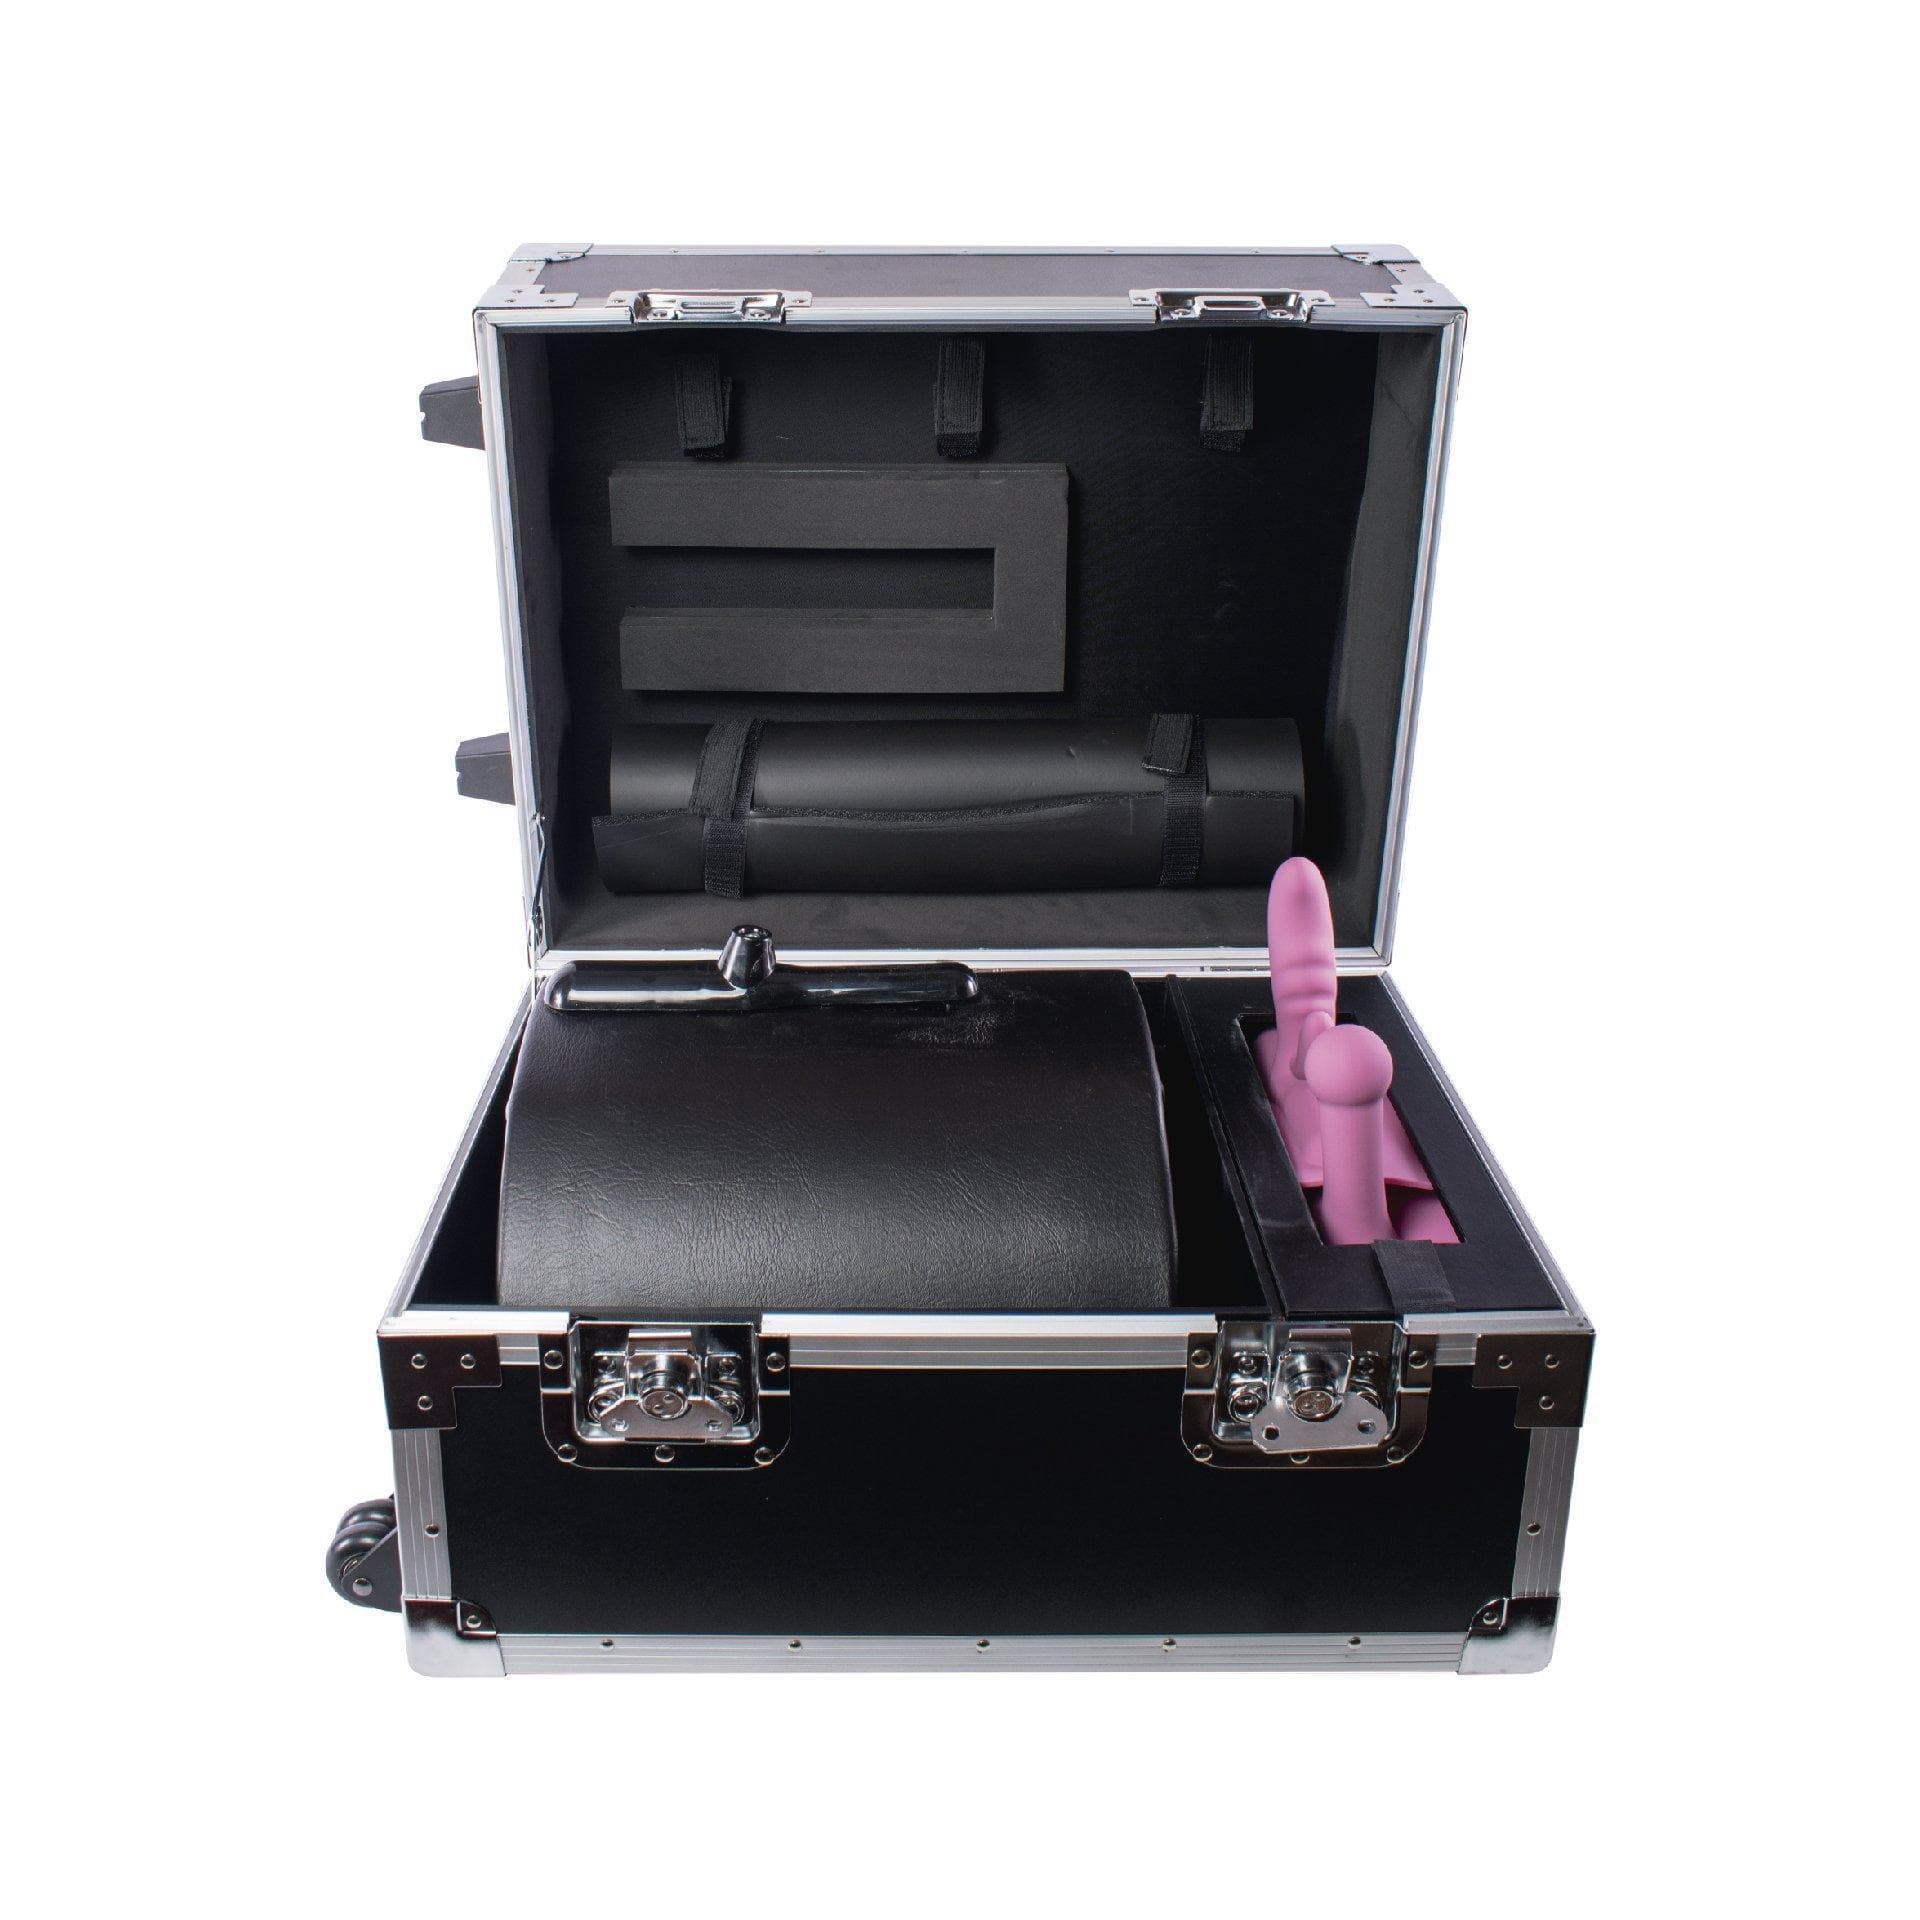 https://cdn.shopify.com/s/files/1/1141/3026/products/motorbunny-mobility-storage-case-accessories-motorbunny-515247.jpg?v=1638478059